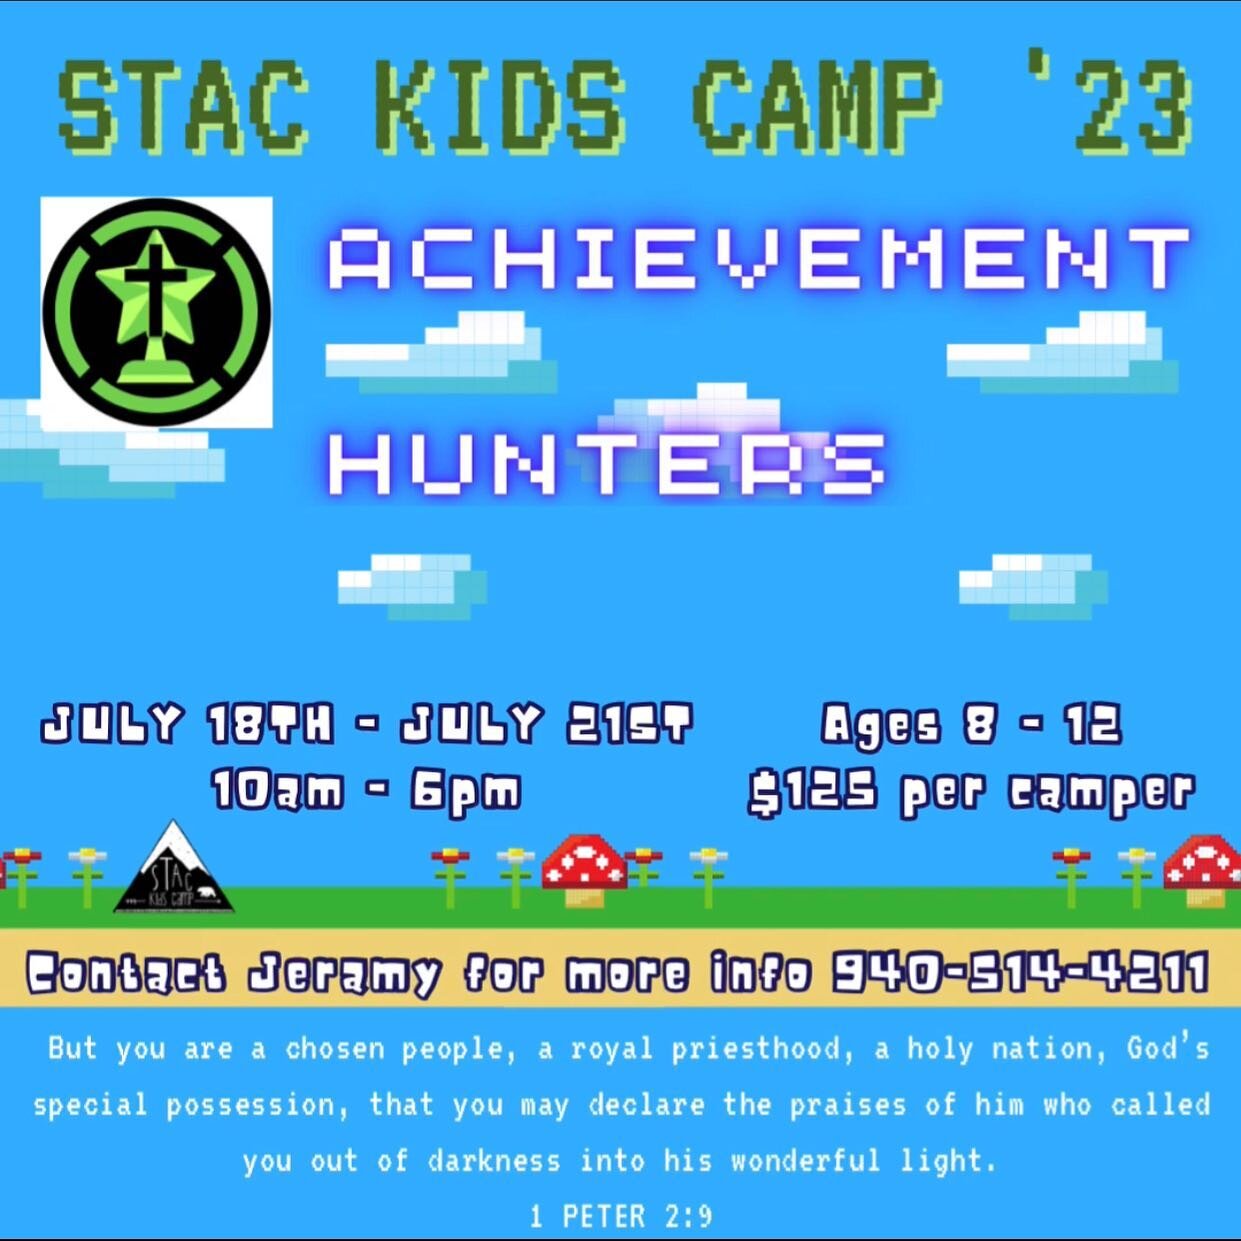 STAC&rsquo;s Annual Summer Camp is back and we&rsquo;re so excited to have your kids join us July 18th-21st.

Registration is open! You can pickup a registration form this Sunday or register online at 
https://stacconnect.churchtrac.com/connect?ei=GZ